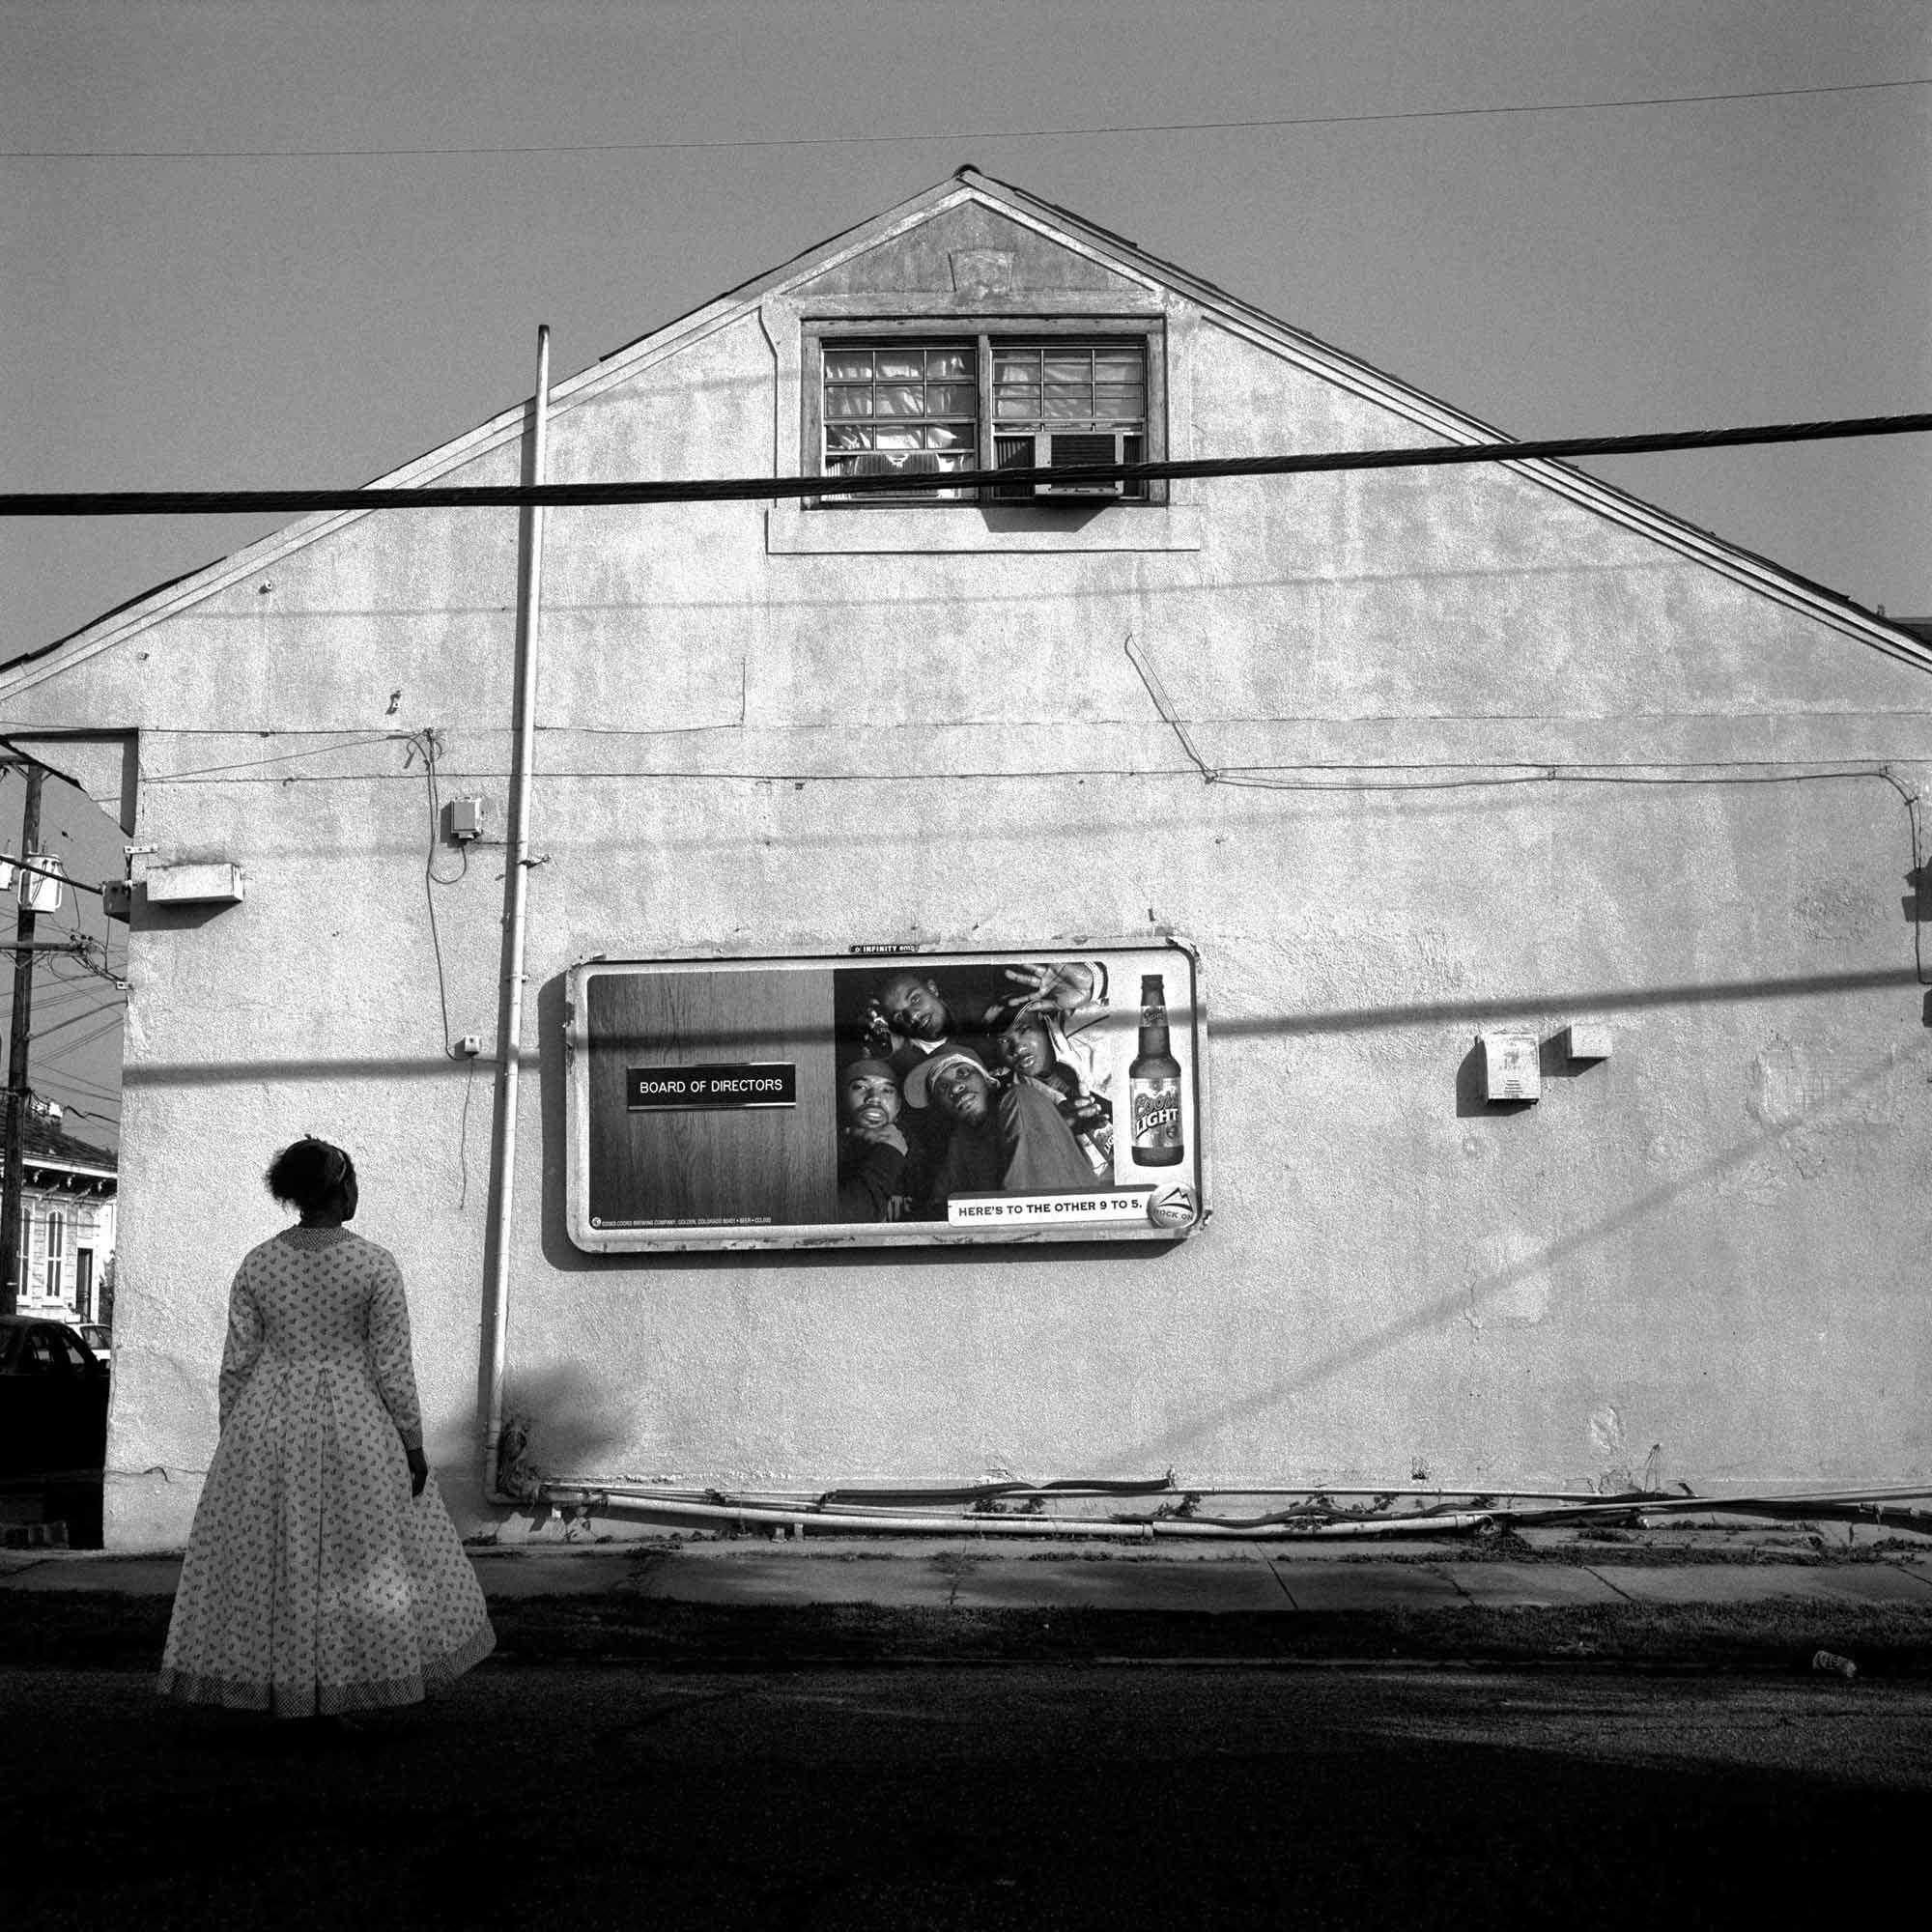 Carrie Mae Weems, African American Art, Black Art, KOLUMN Magazine, KOLUMN, KINDR'D Magazine, KINDR'D, Willoughby Avenue